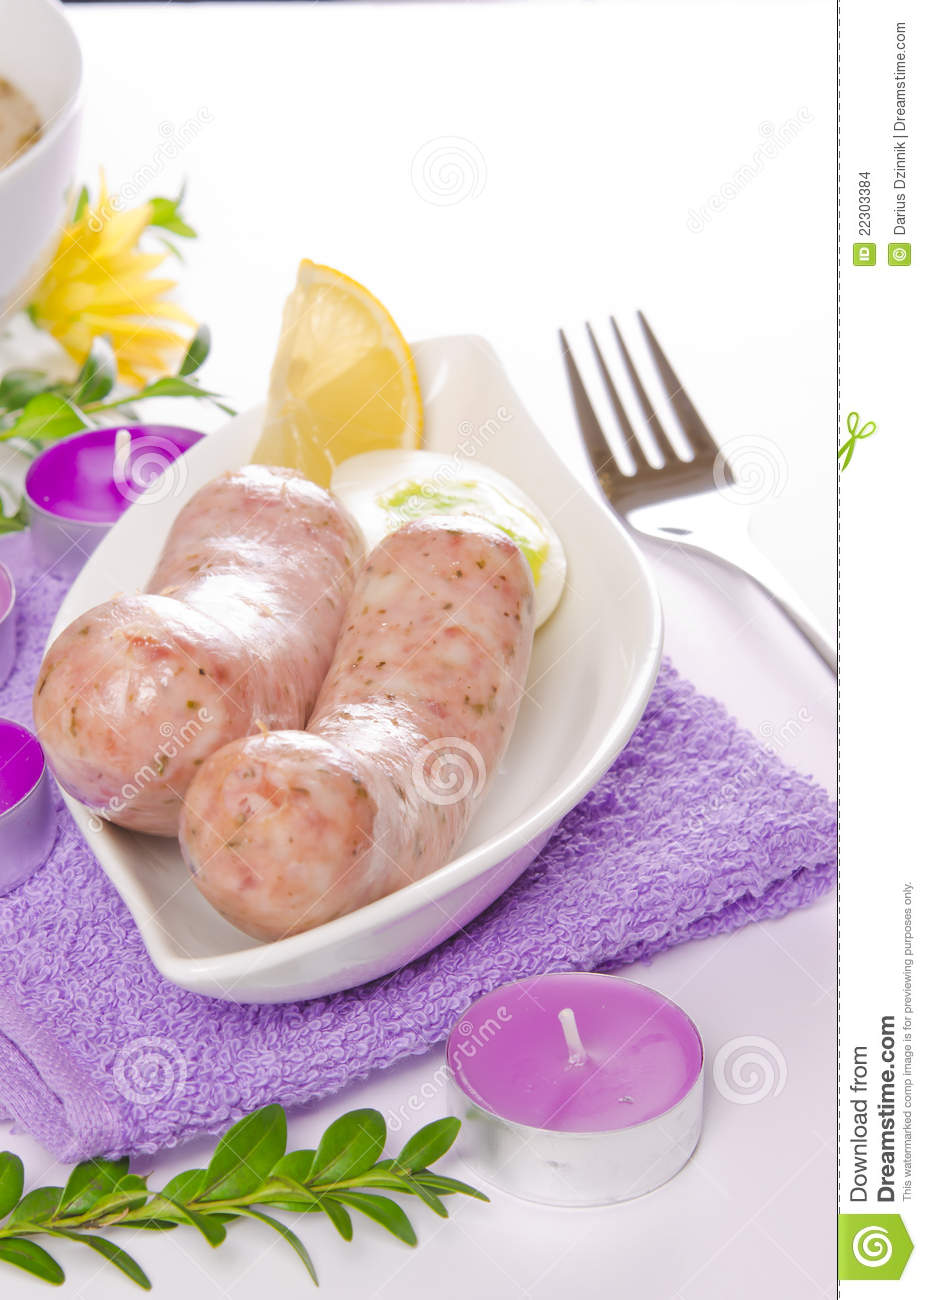 Easter Breakfast Stock Images   Image  22303384